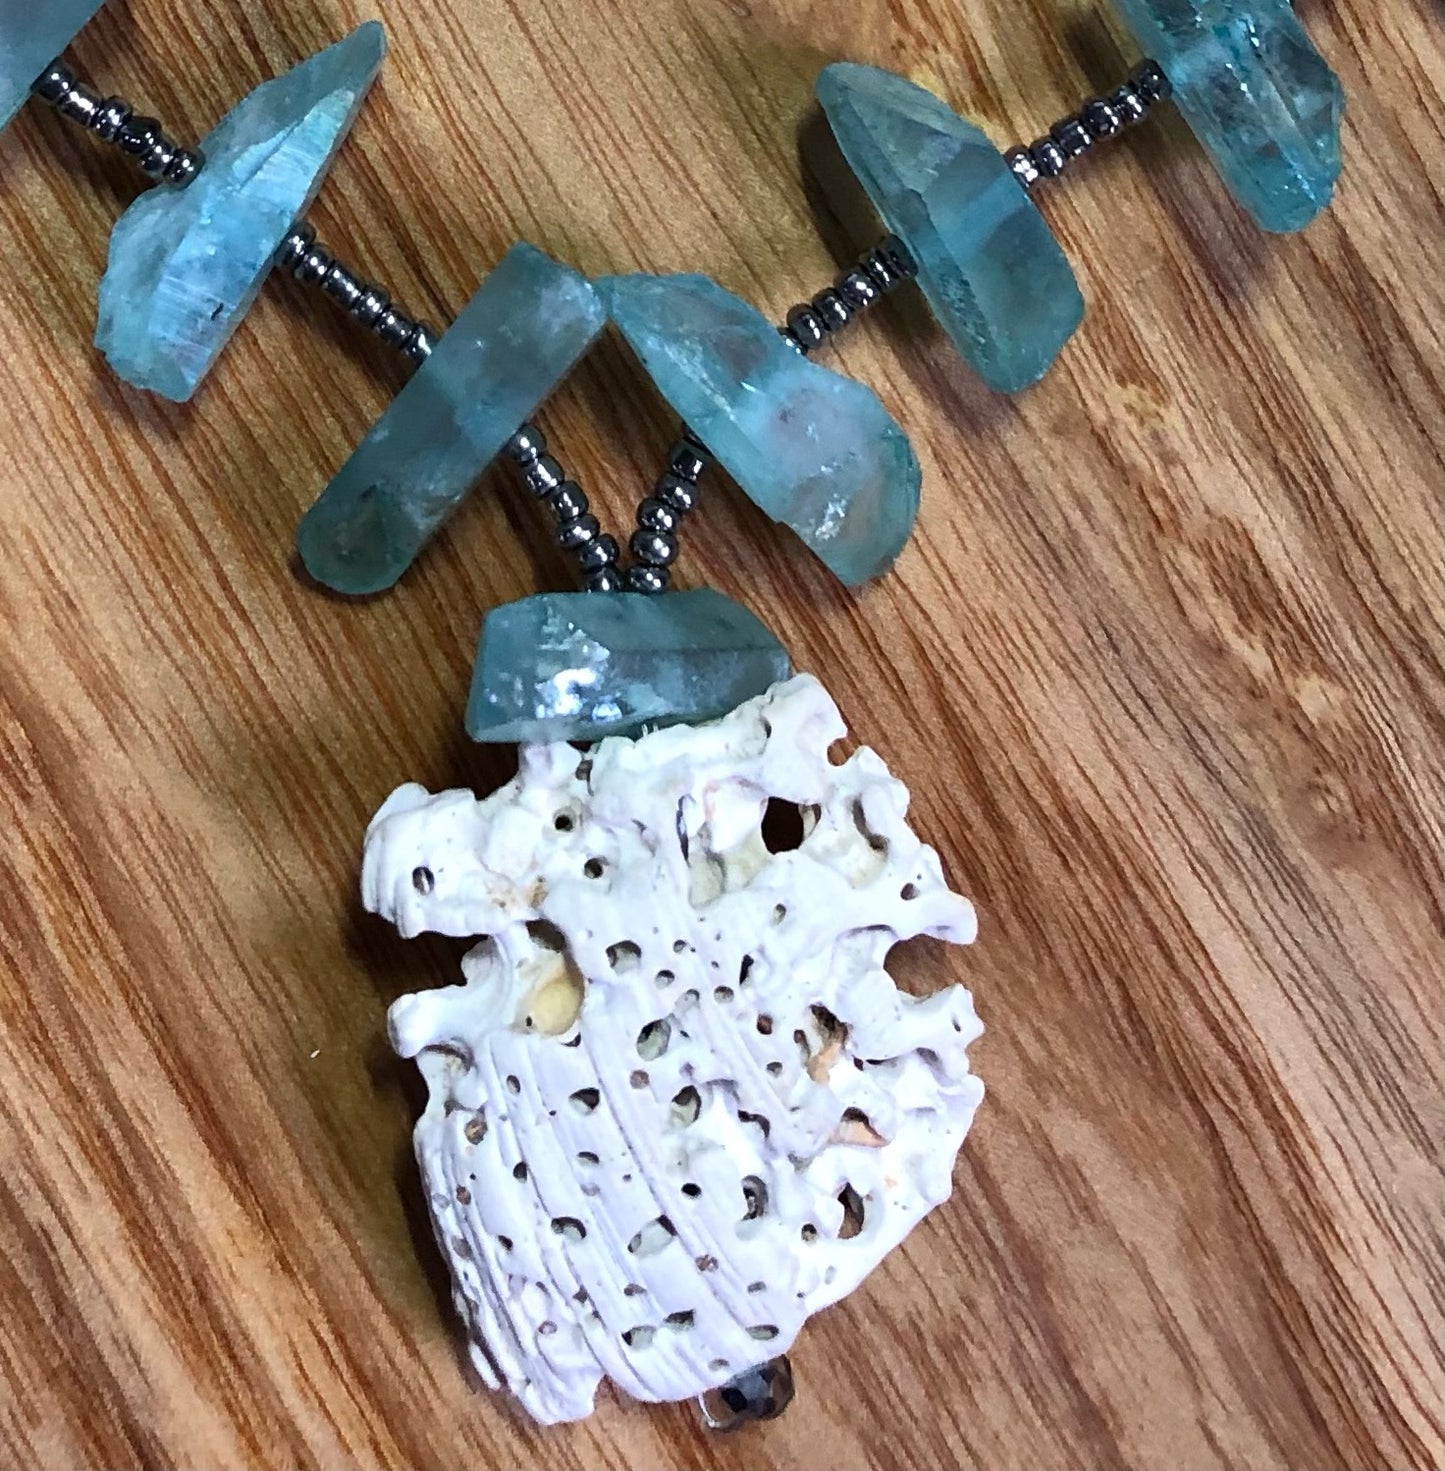 Aqua aura quartz points necklace with white coral, glass seed beads, & silver plated pearl clasp.